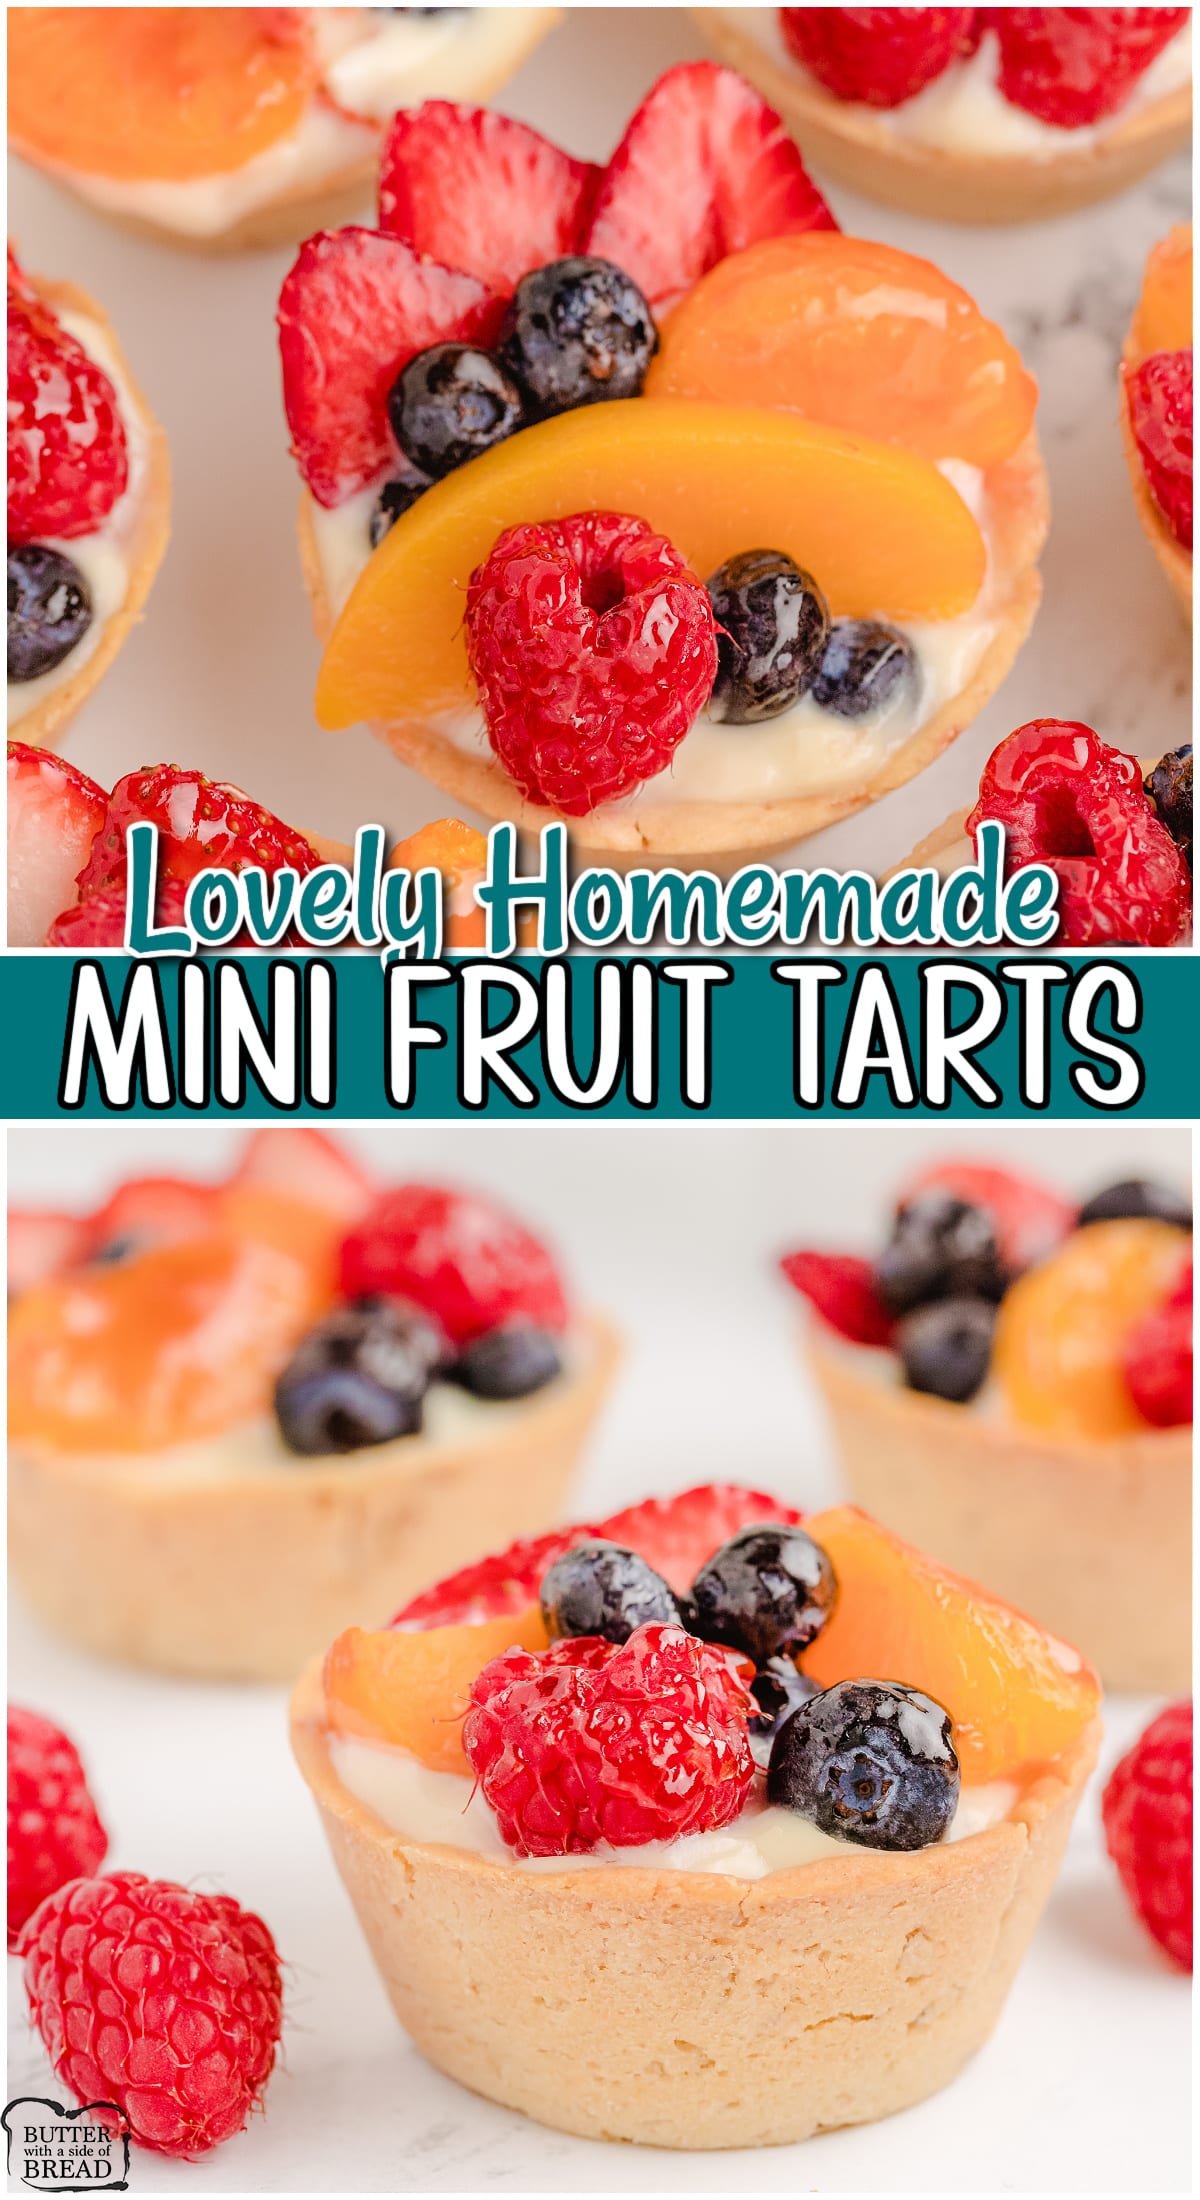 Mini Fresh Fruit Tarts made with a homemade brown sugar oat tart shell, topped with sweet cream and fresh fruit and berries! Lovely dessert with fabulous fresh flavors everyone enjoys!